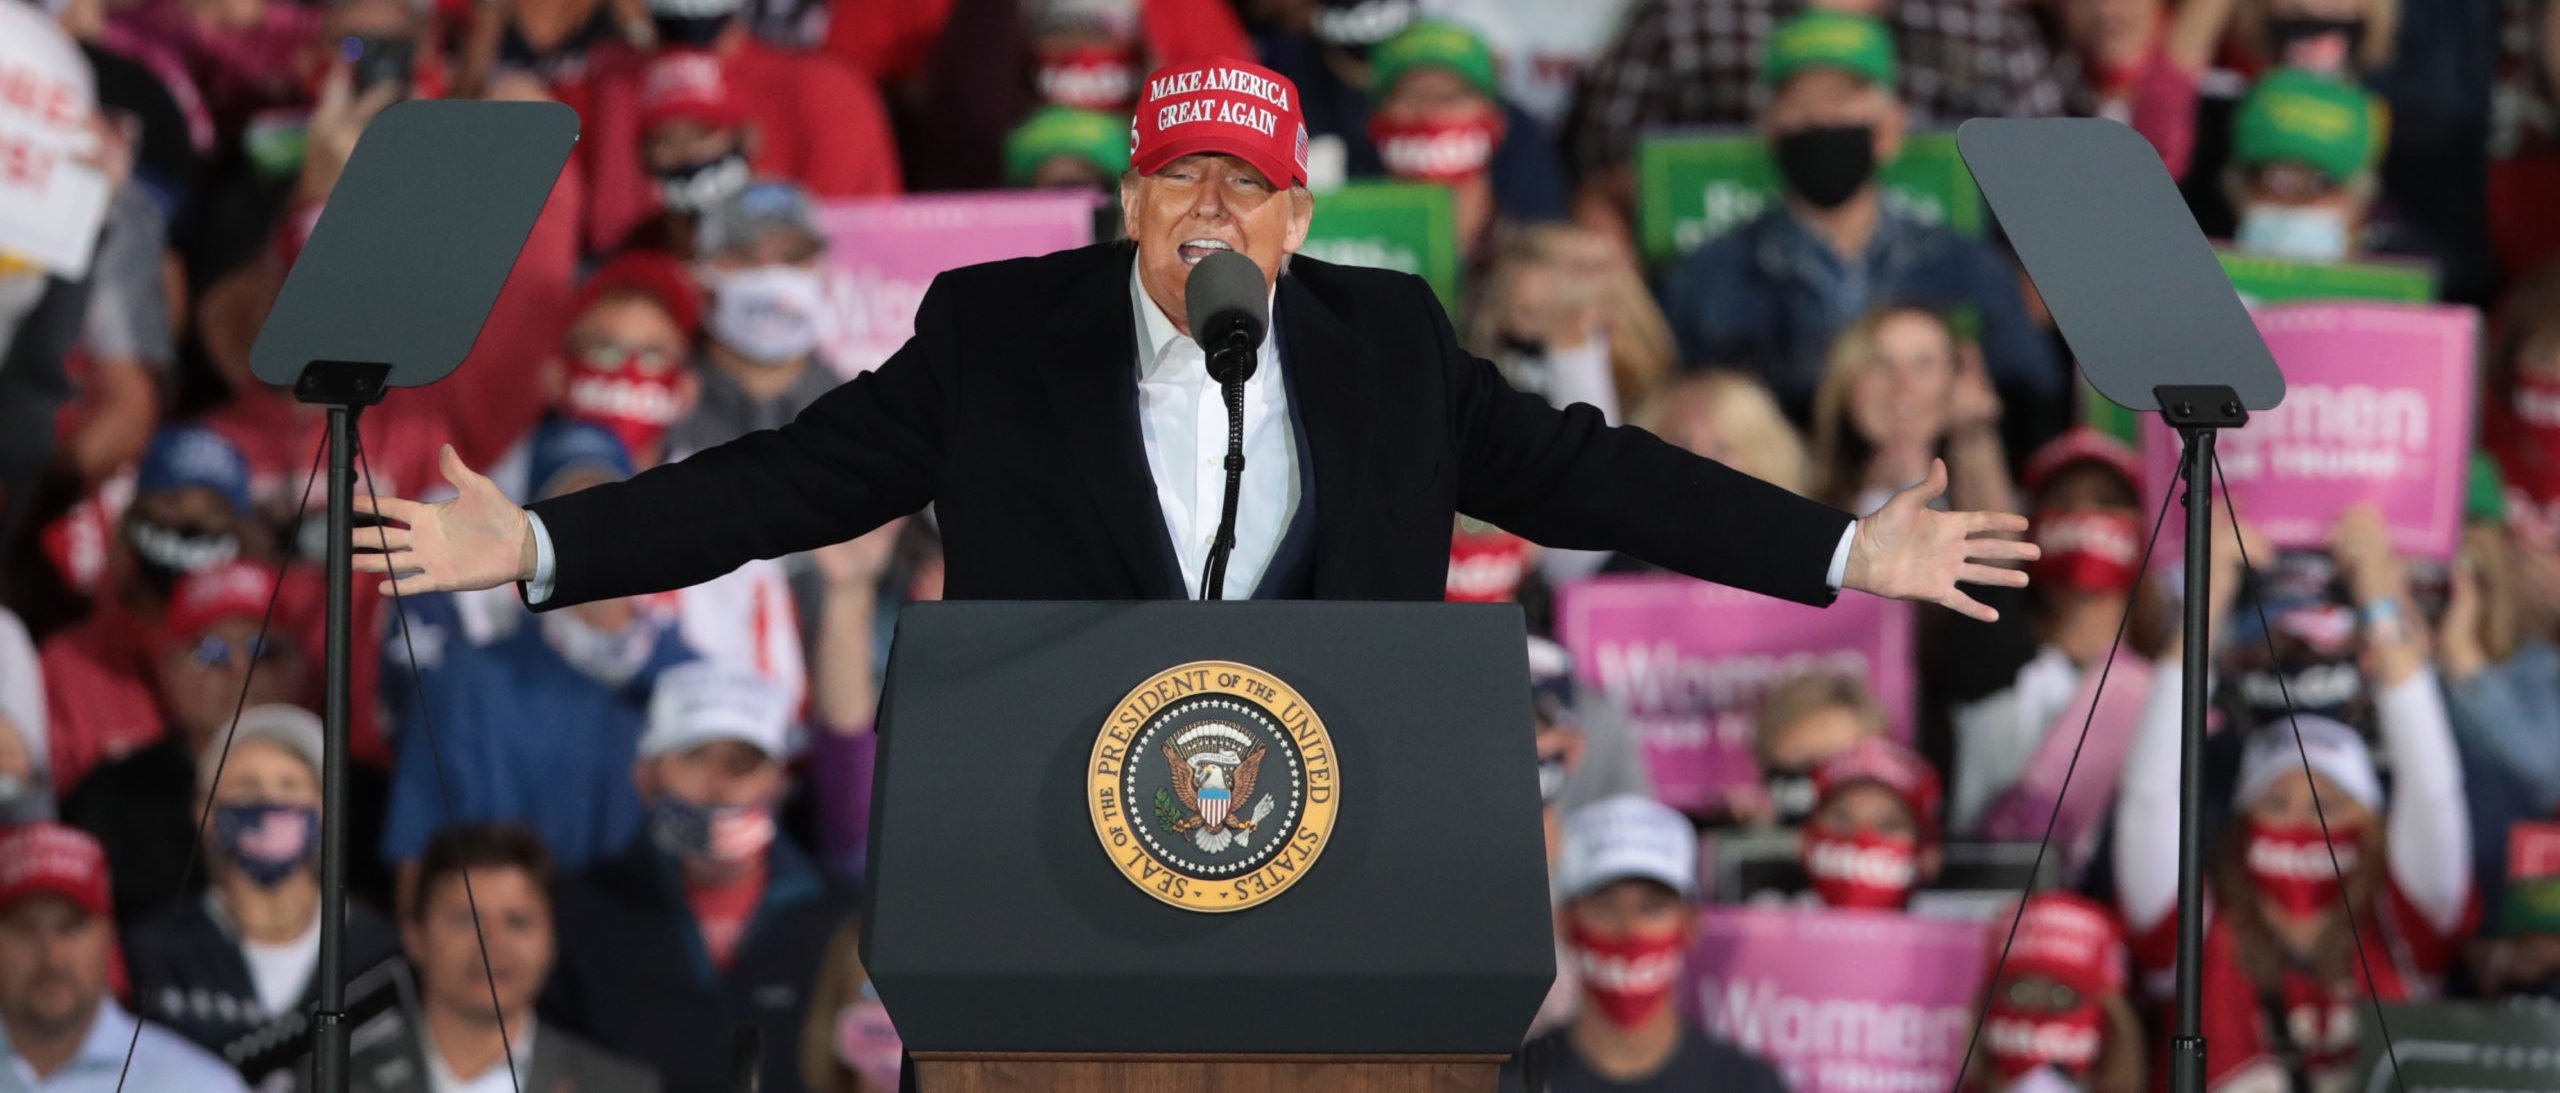 DES MOINES, IOWA - OCTOBER 14: President Donald Trump speaks to supporters during a rally at the Des Moines International Airport on October 14, 2020 in Des Moines, Iowa. (Photo by Scott Olson/Getty Images)